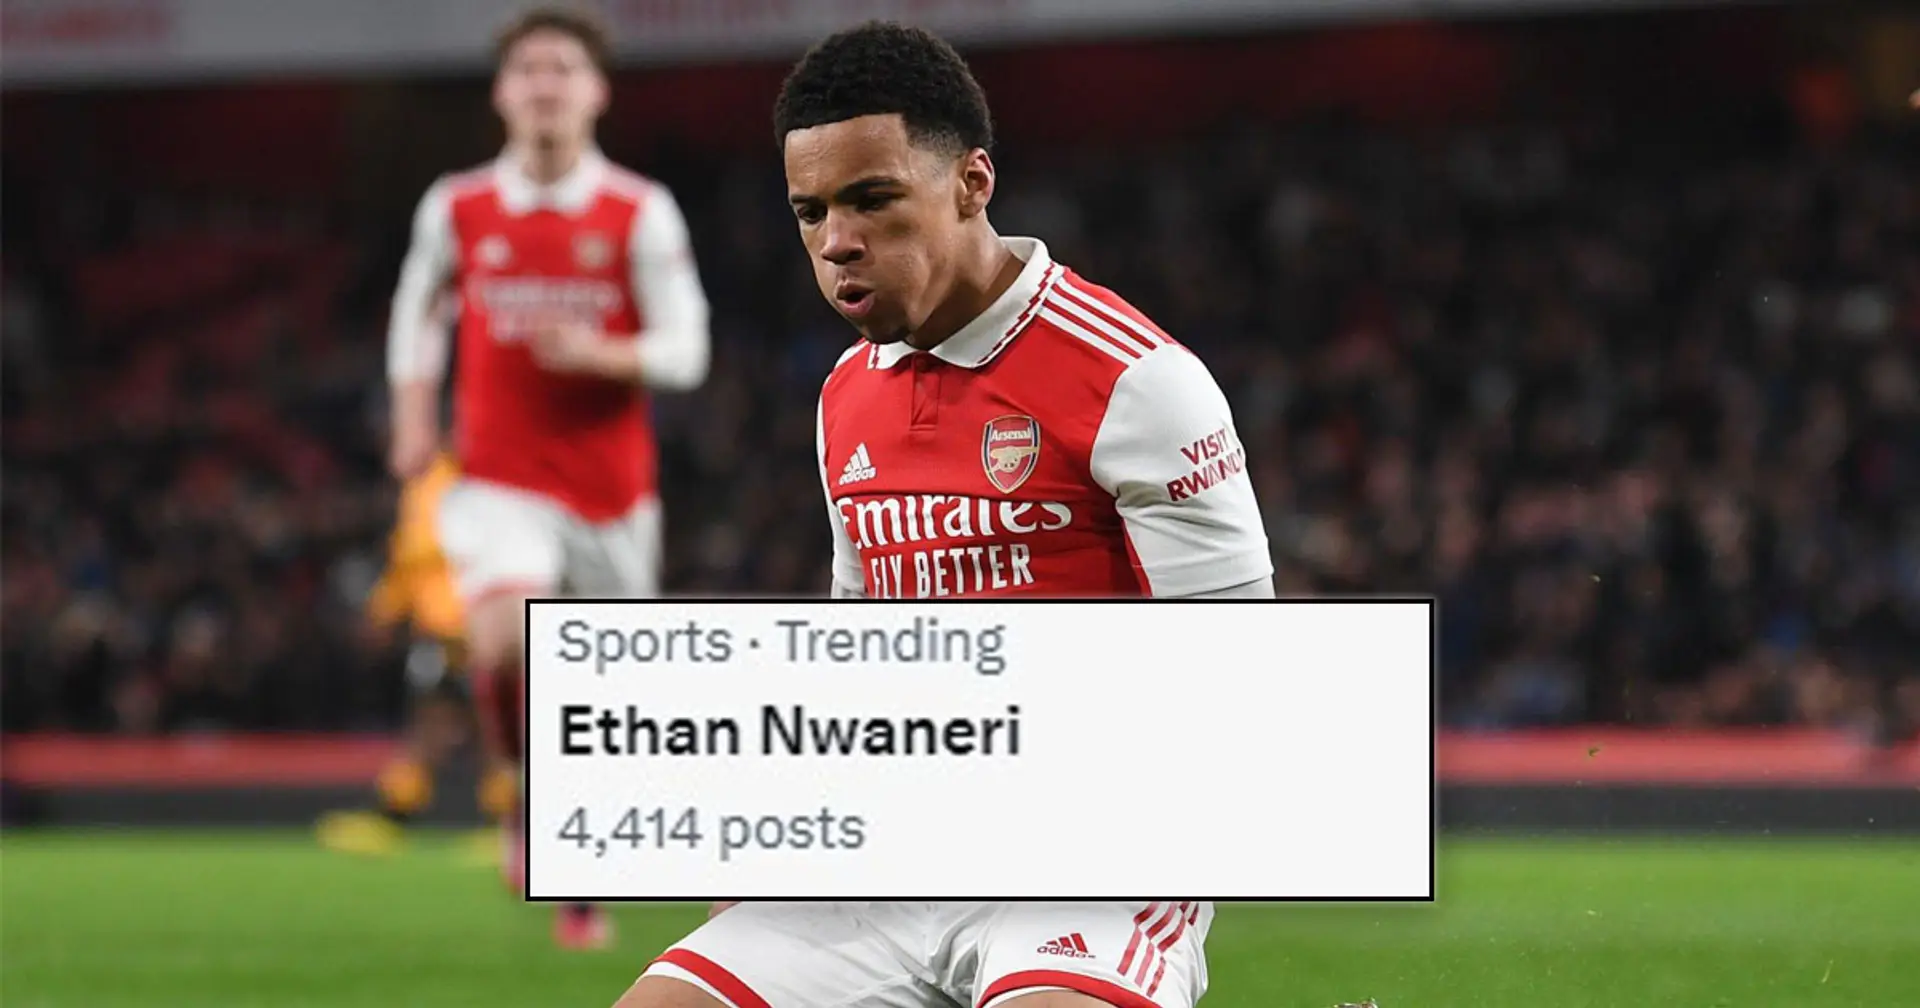 Why is Ethan Nwaneri trending among Arsenal fans? Answered